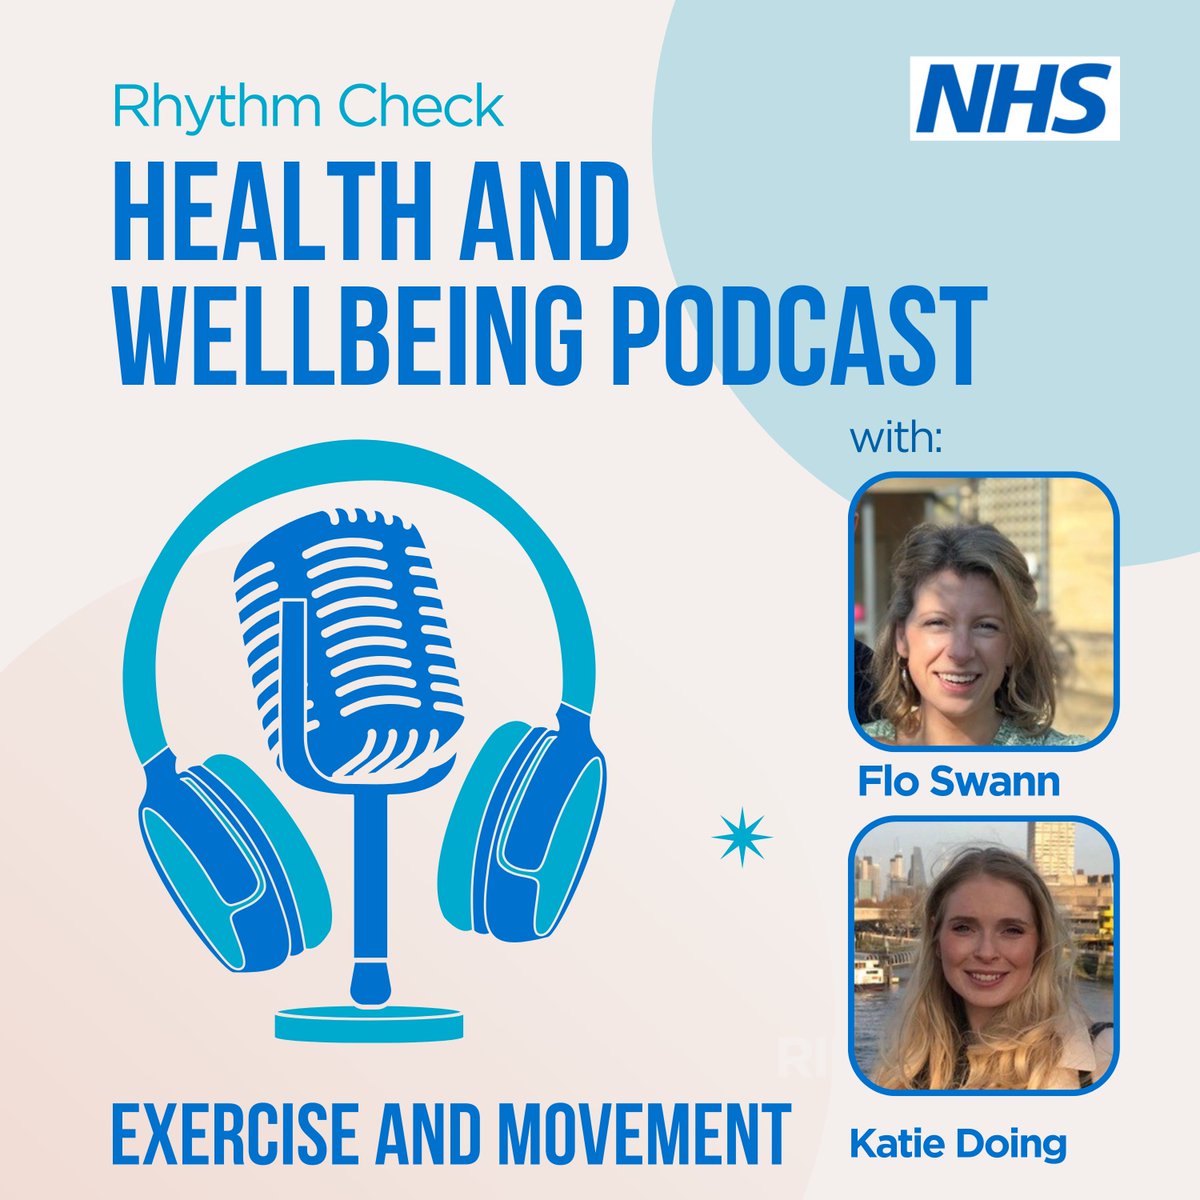 Episode 4 of our health and wellbeing podcast is out. By trainee Drs and for #traineedoctors it's on benefits of movement and #exercise. Listen direct bit.ly/3xwJhOj or search your podcast app for 'Rhythm Check'. @EoETrainees @eoe_psw @HJohnson2FSD @SimonDGregory